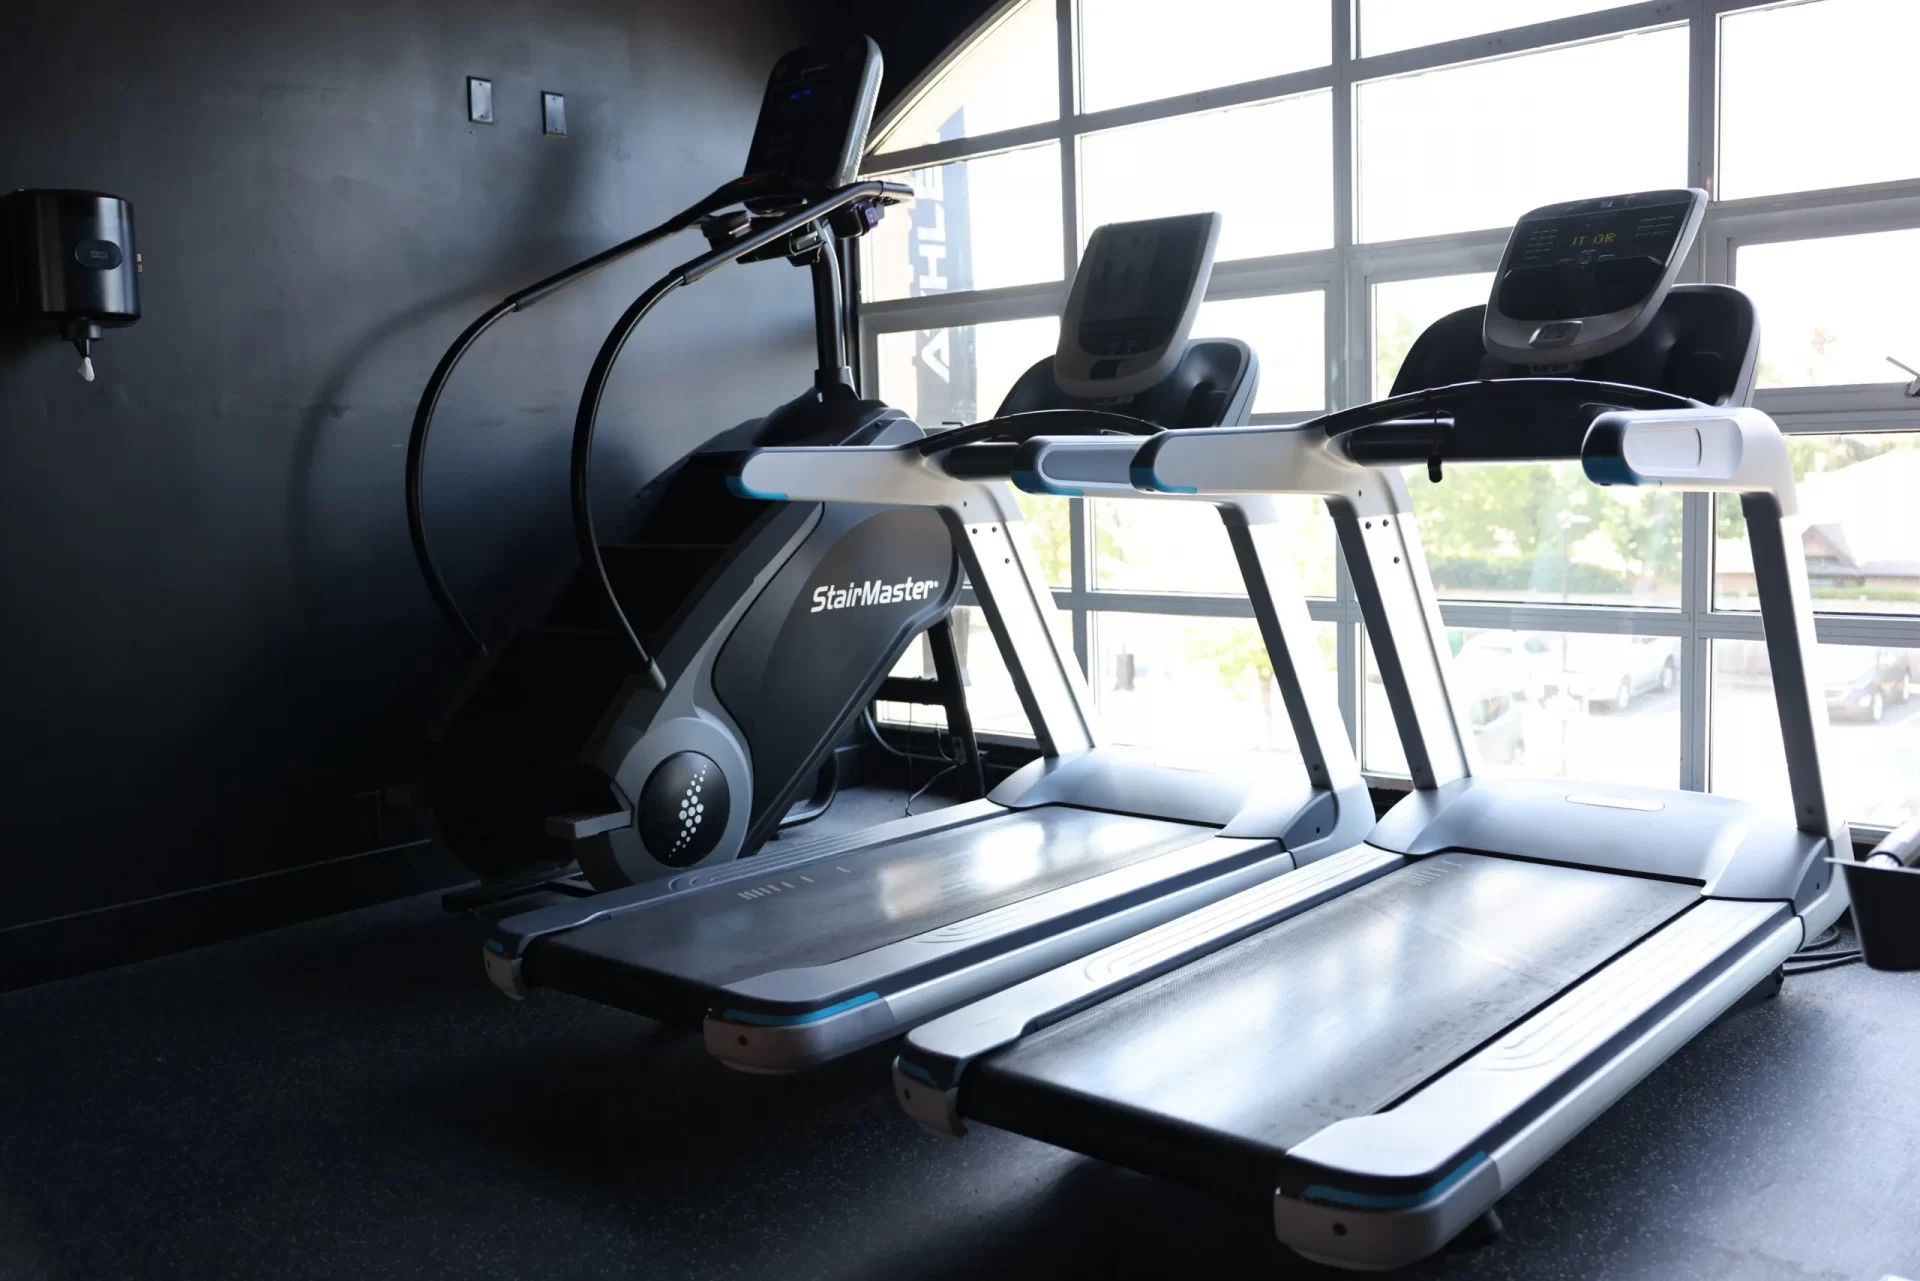 Stairmaster and exercise bikes at Genuine athletics